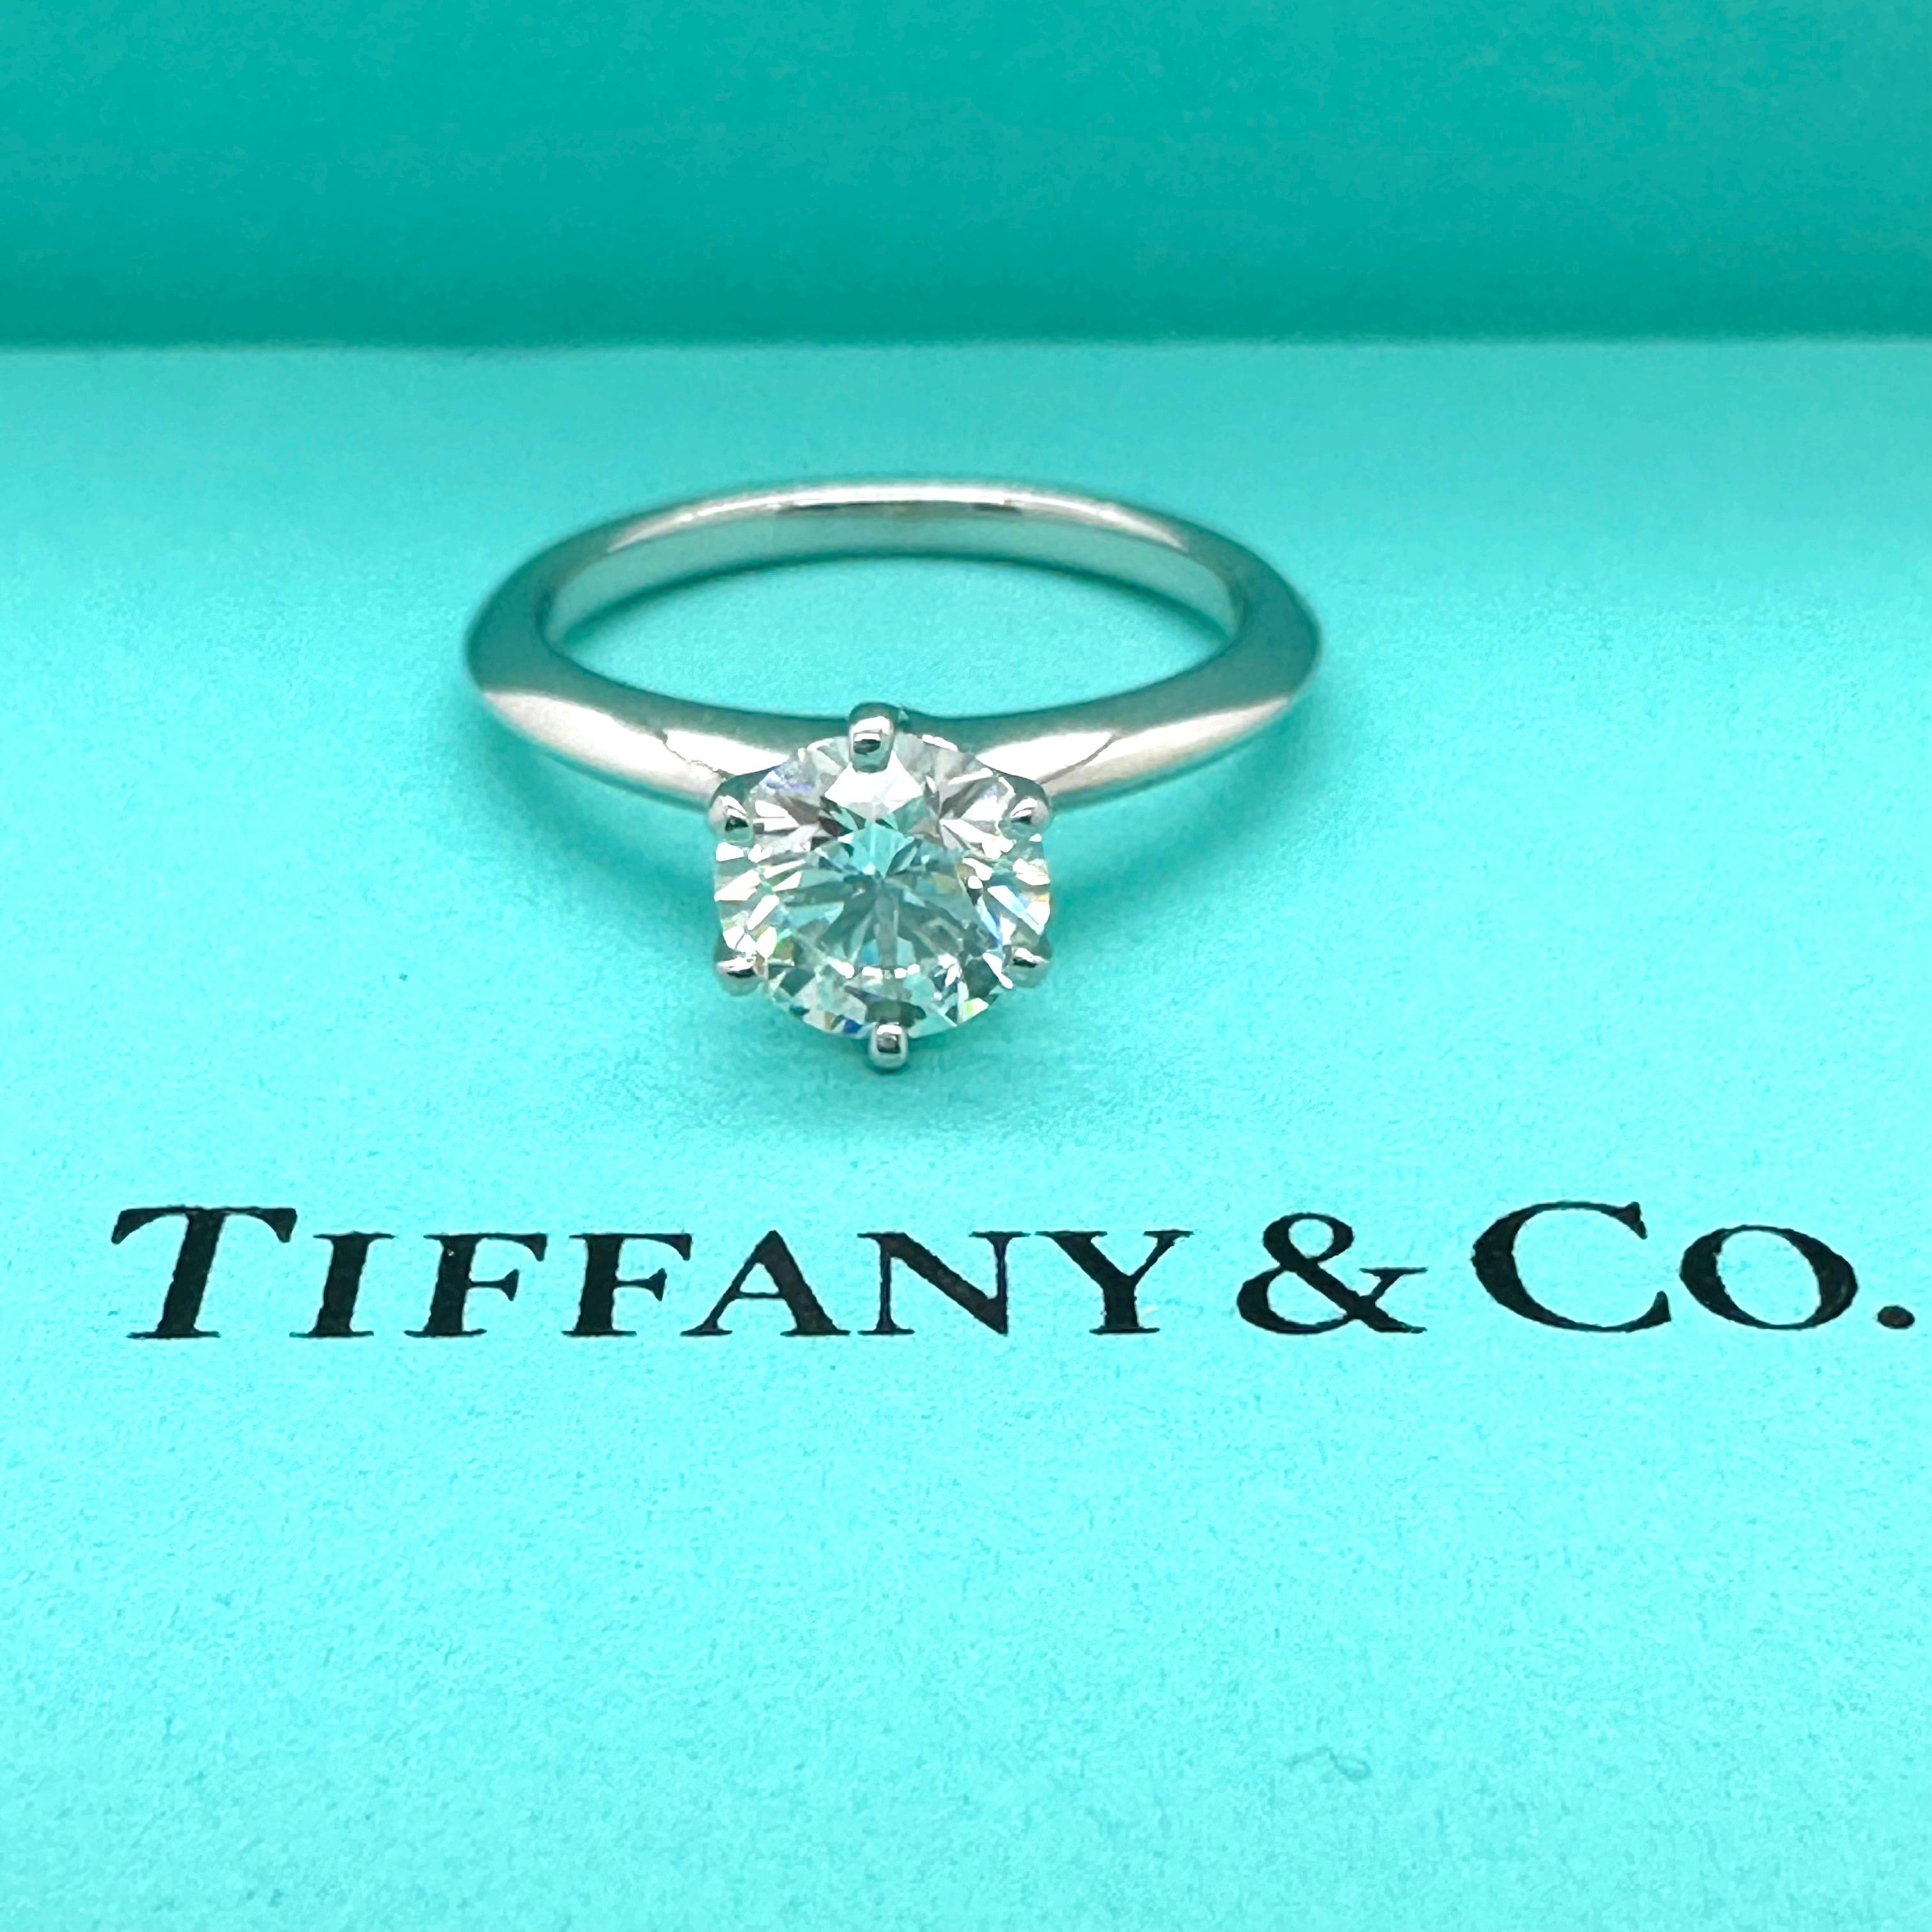 Tiffany & Co. Round Diamond 1.12 CTS G VS1 Solitaire Engagement Ring COA Box For Sale 7